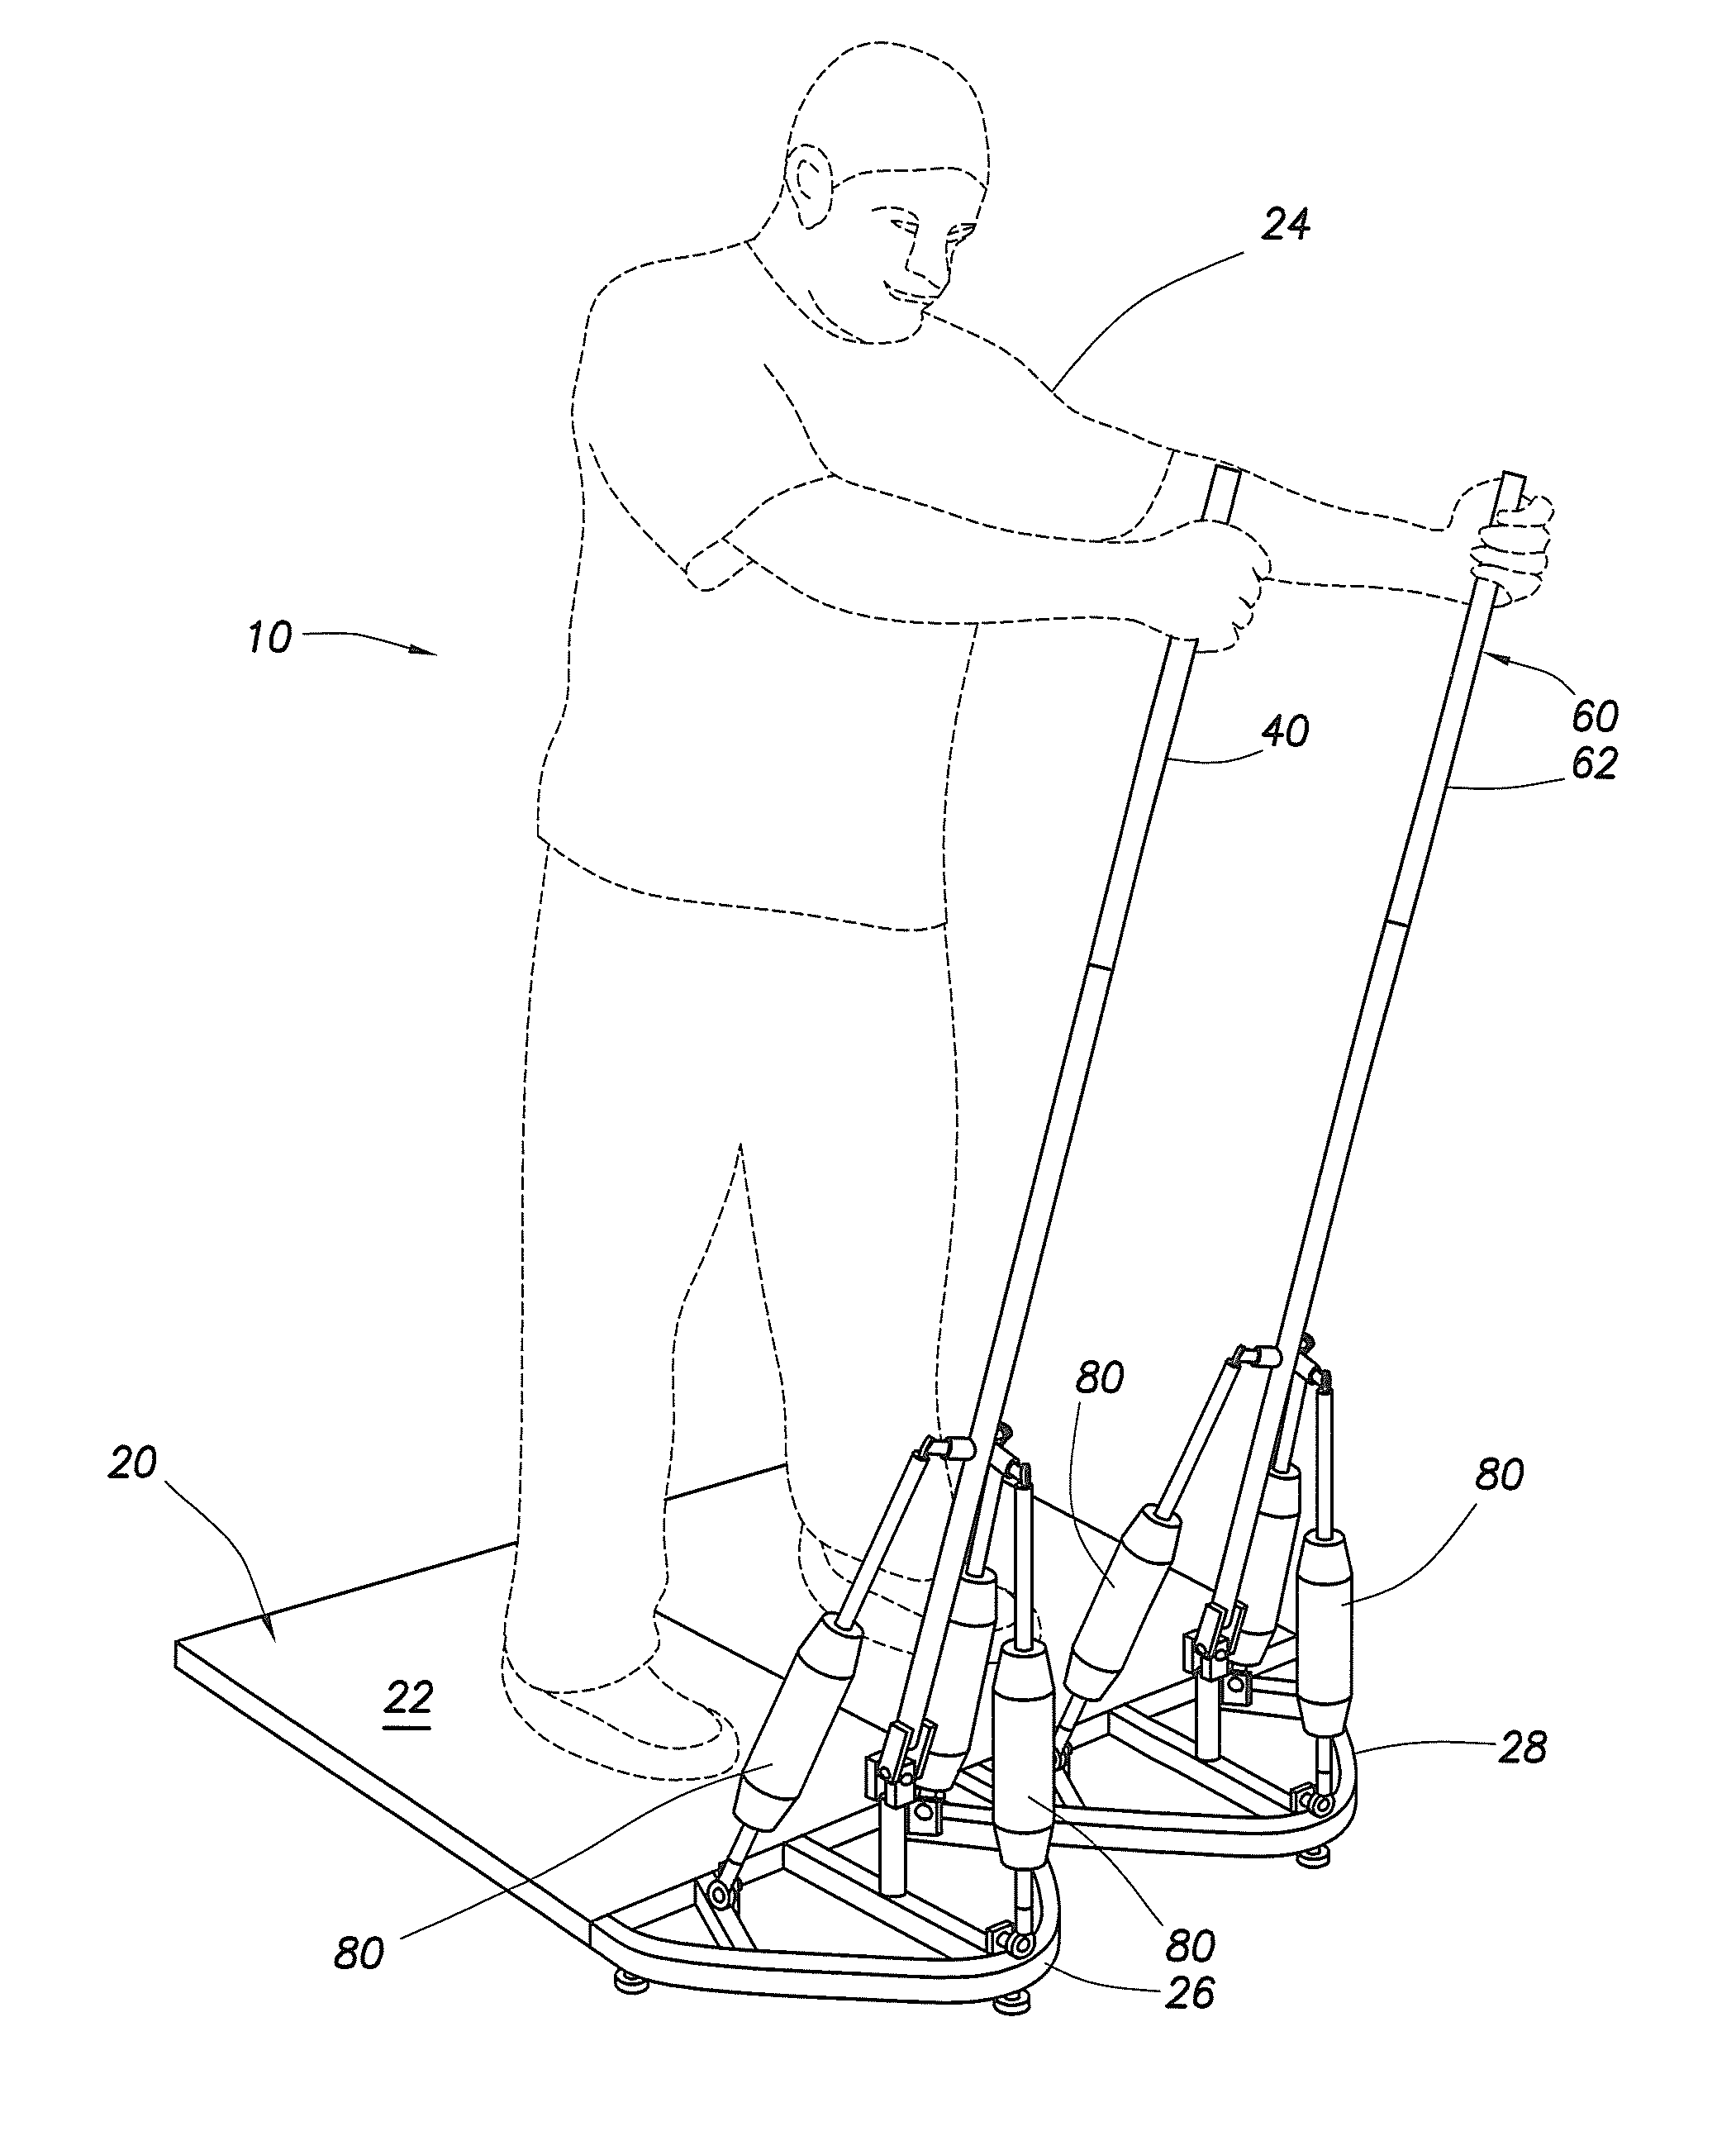 Strength and balance exercise apparatus